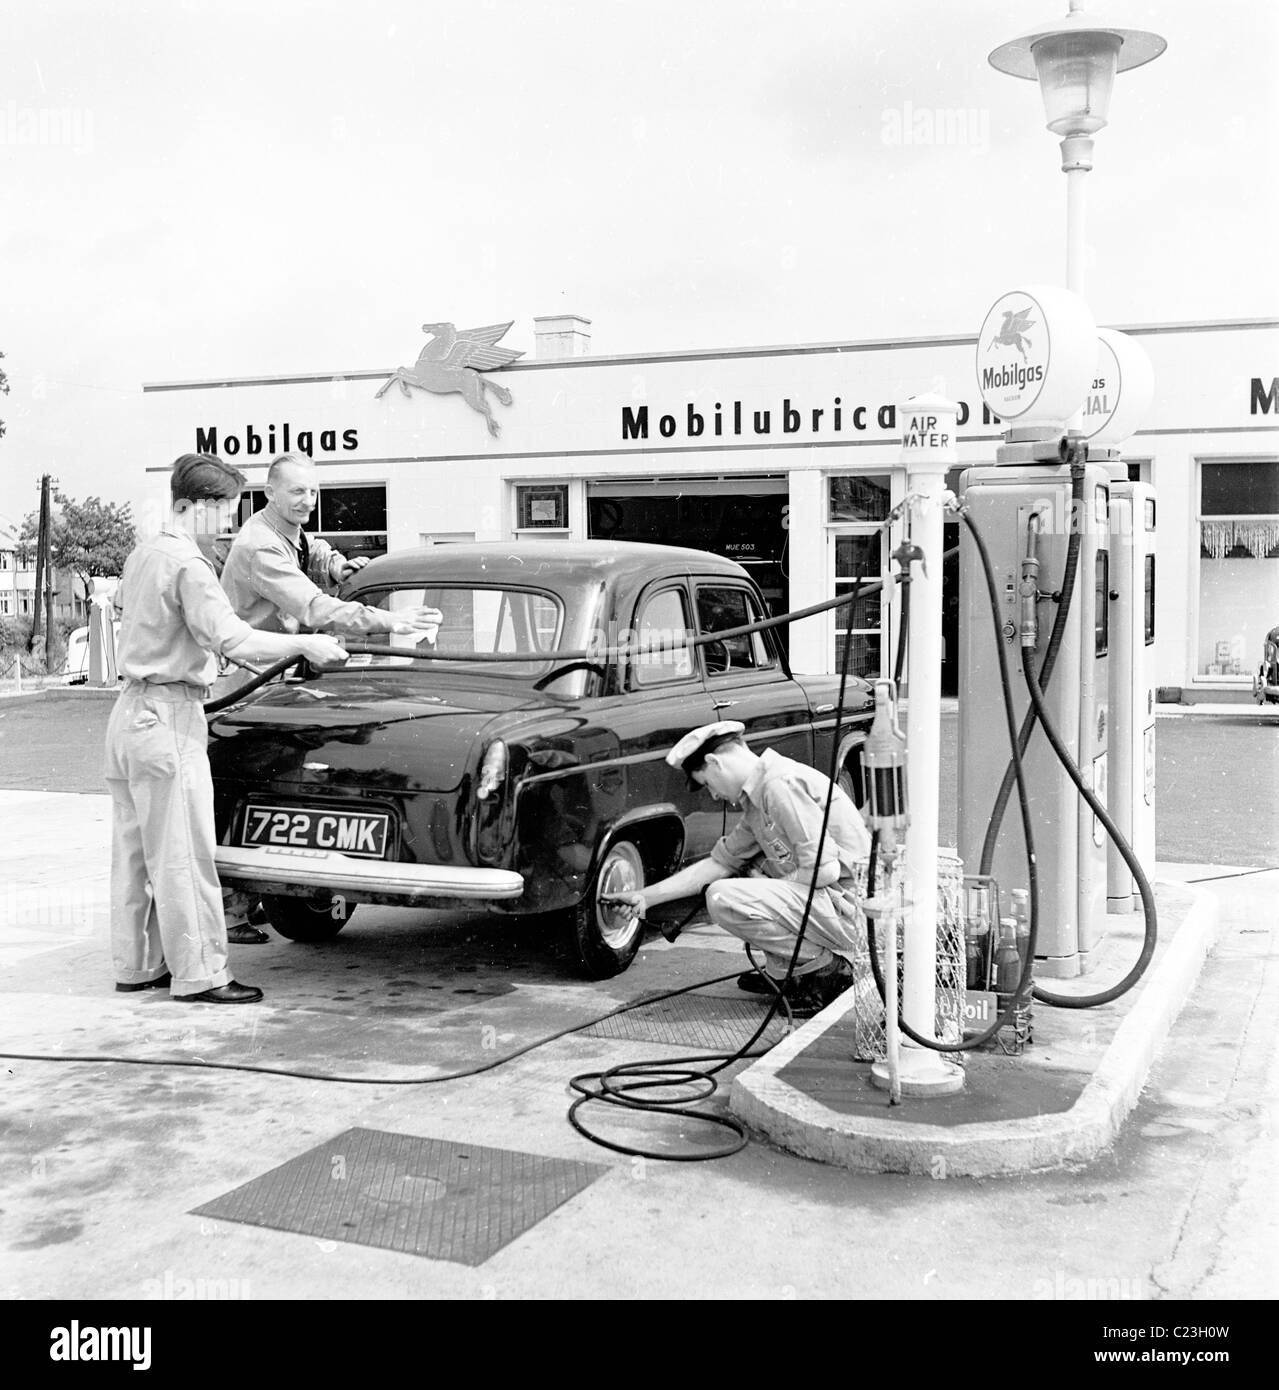 Three attendants service a car on the forecourt of the Mobilgas garage, The Whirlwind in this historical picture from the 1950s. Stock Photo